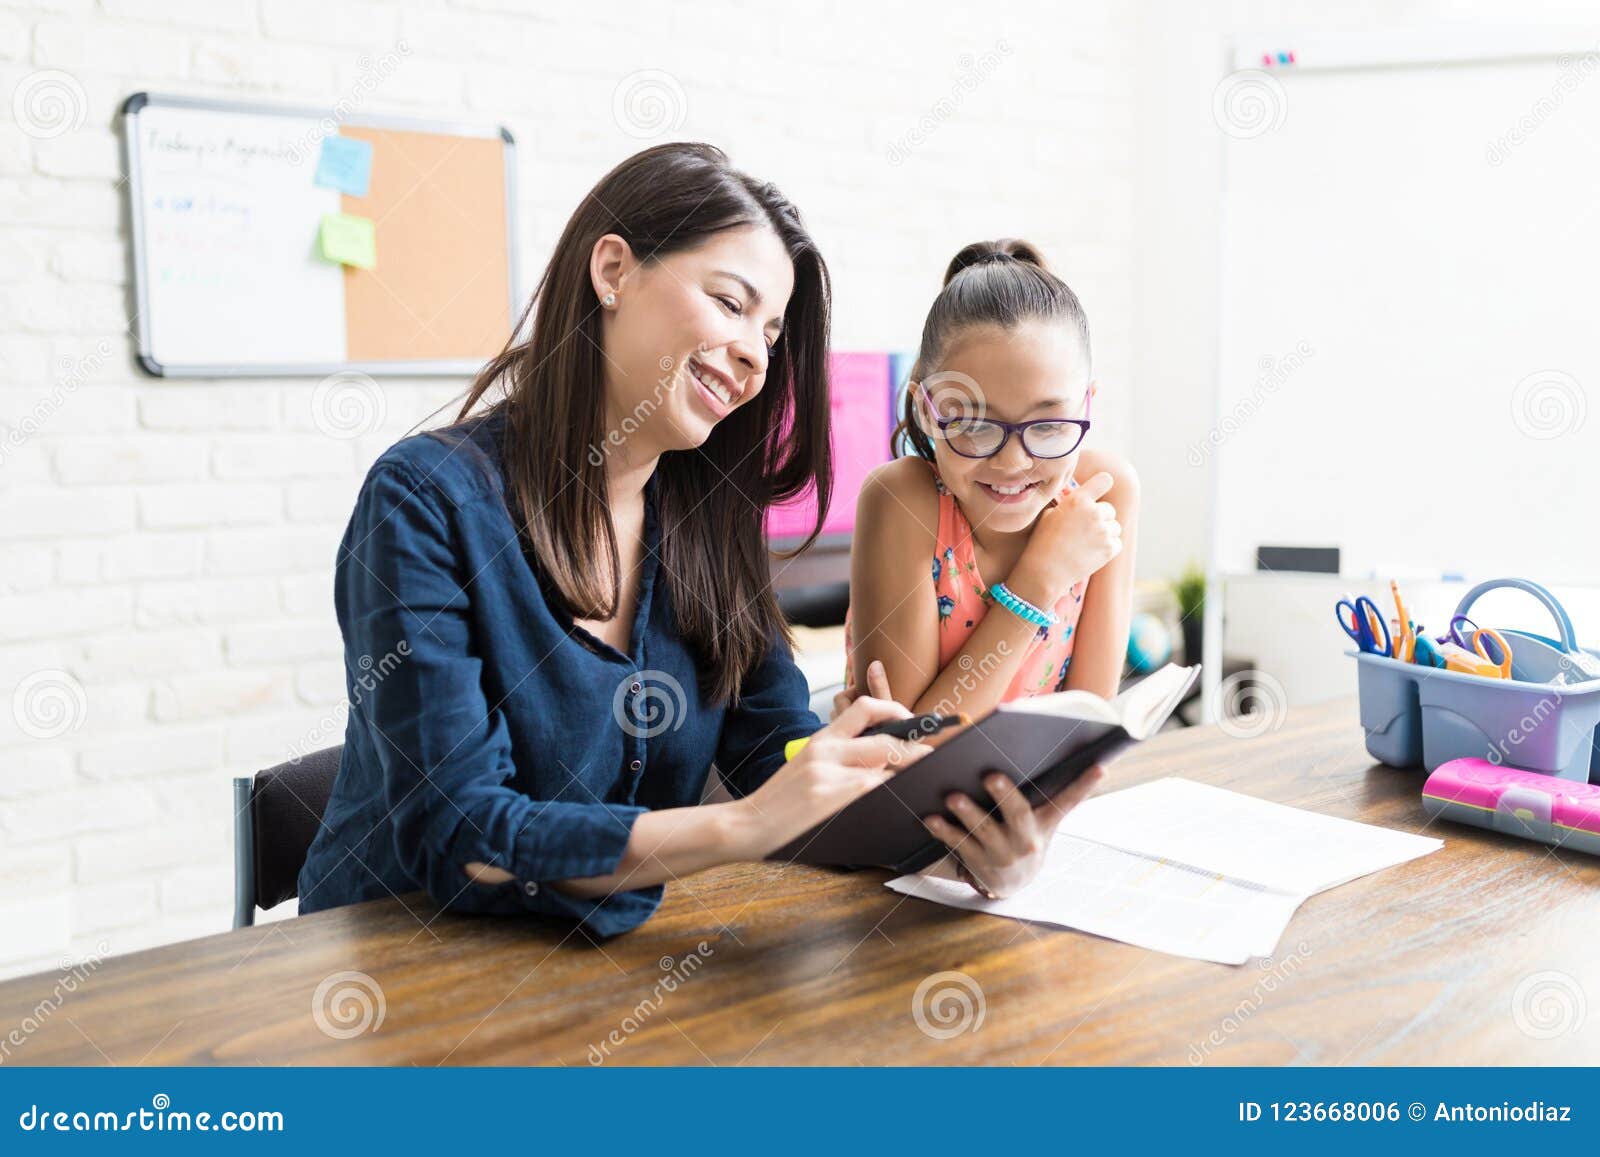 confident mother reading book to girl at table